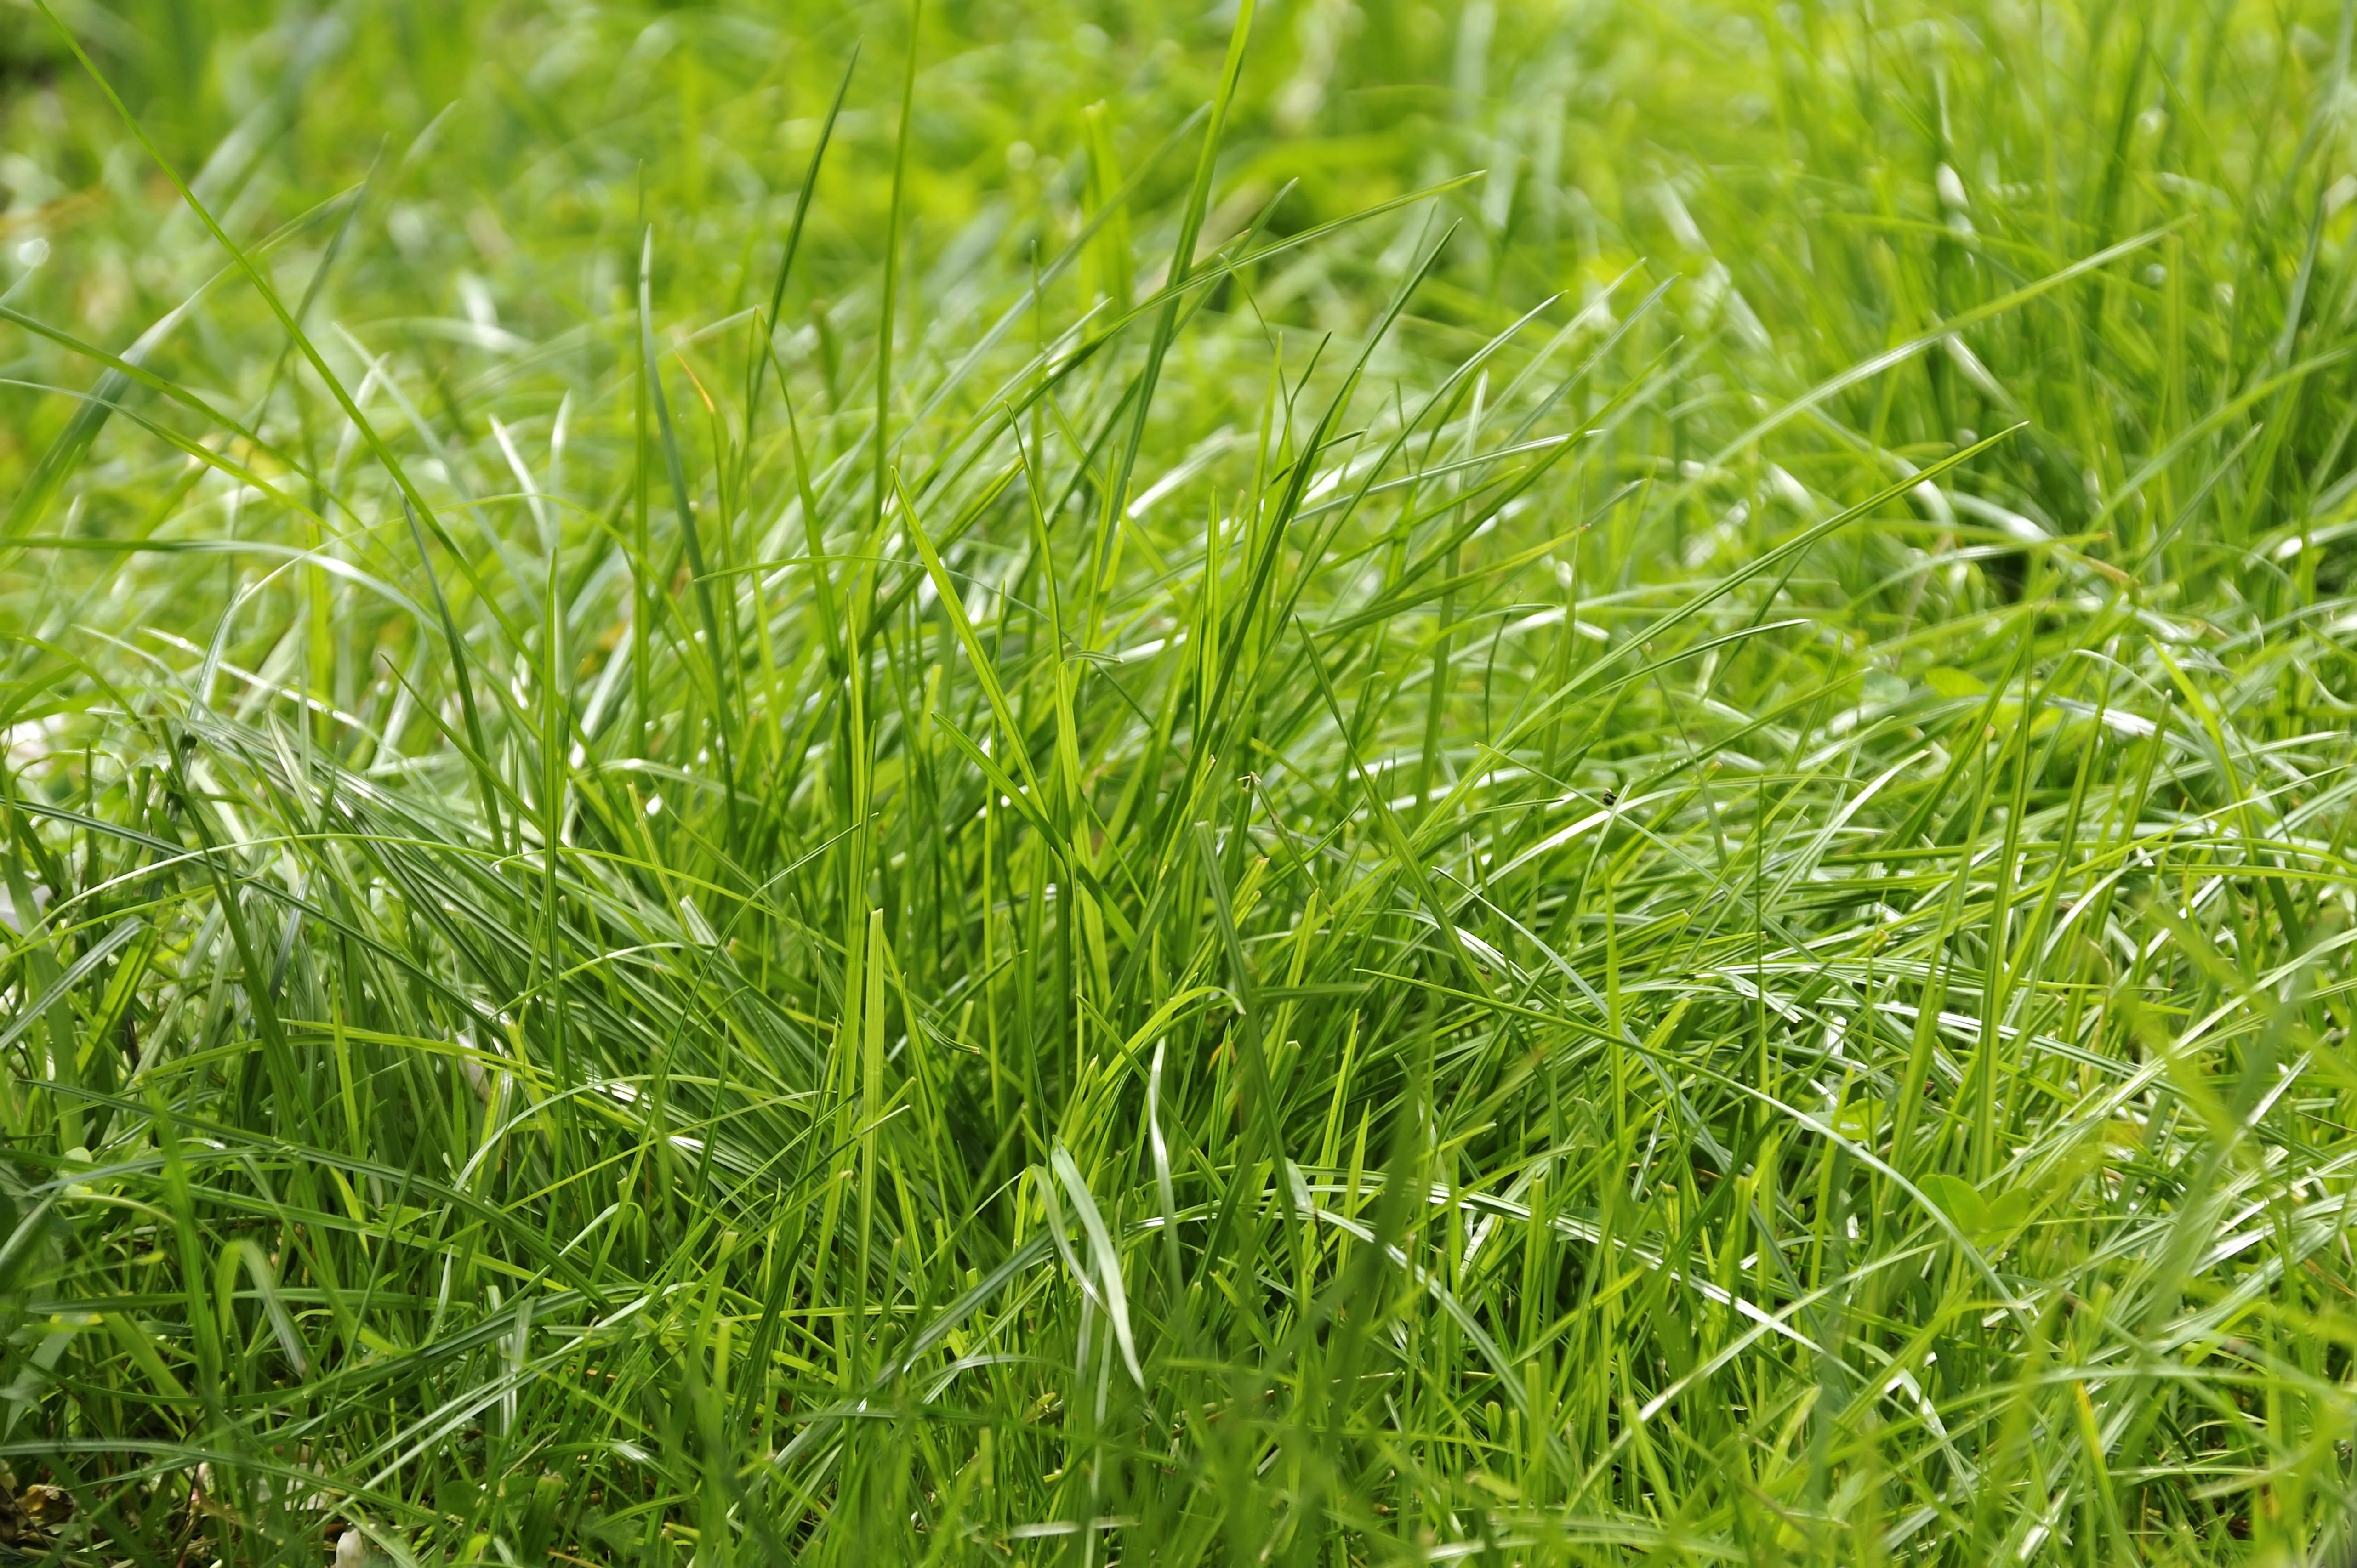 A bright green patch of tall grass